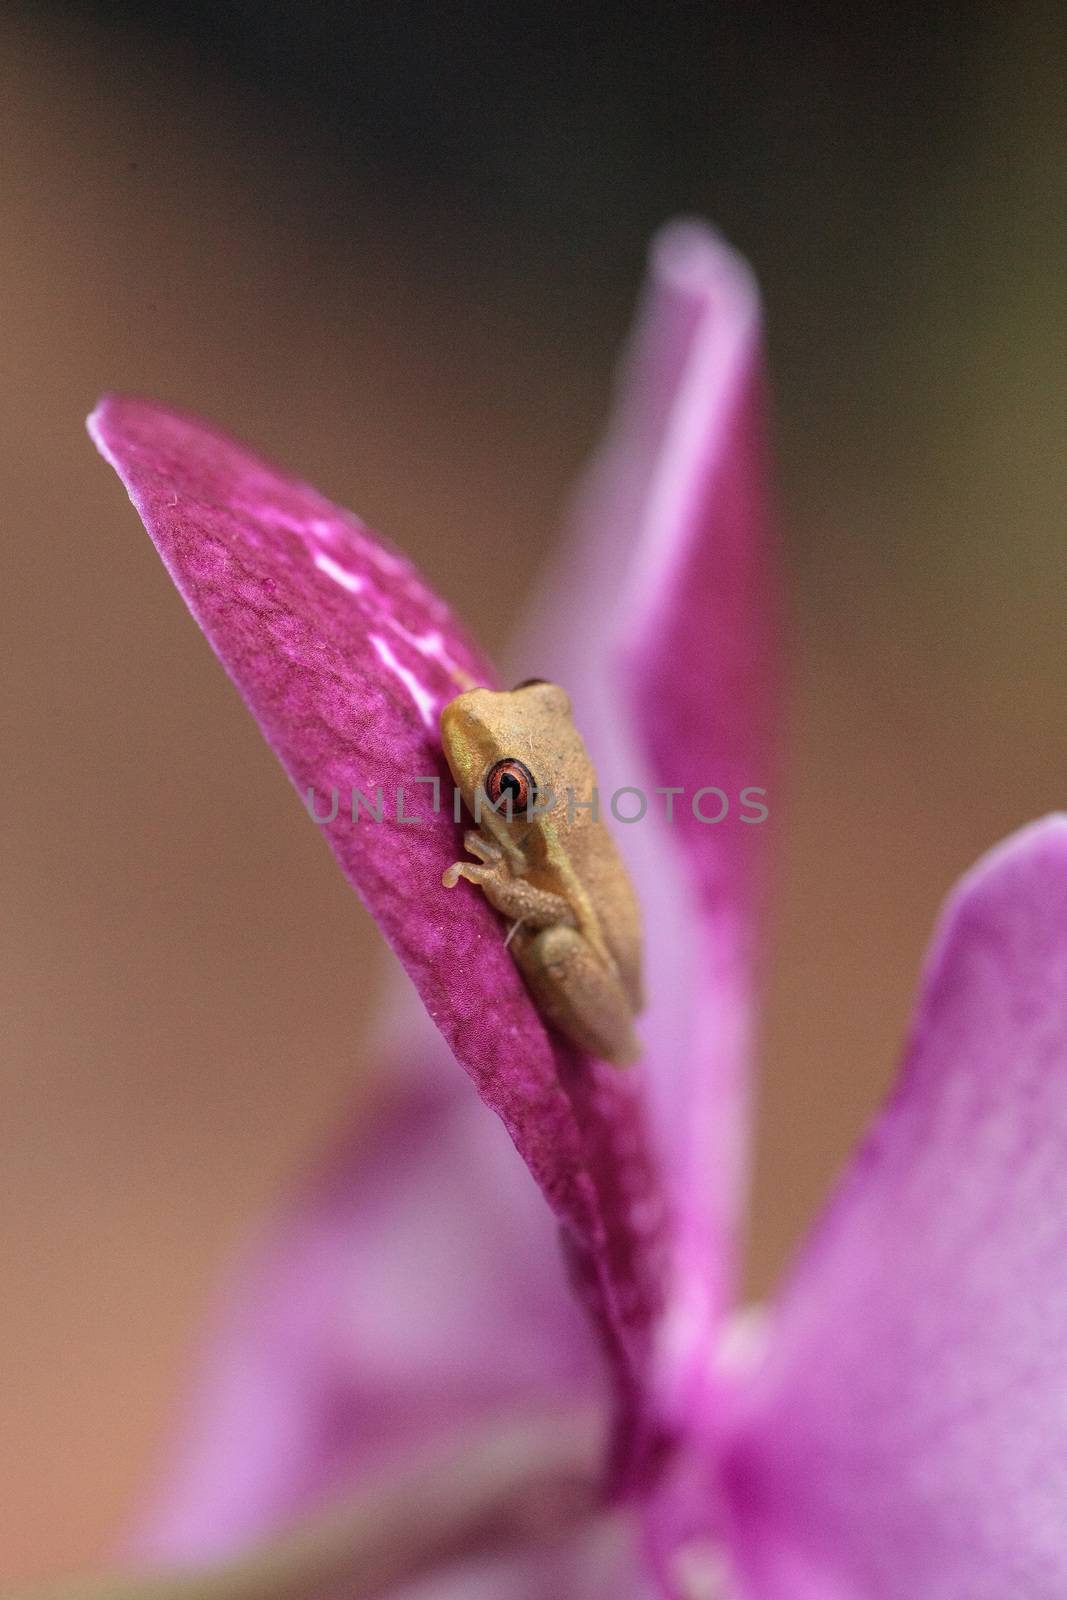 Green Baby pine woods tree frog Dryphophytes femoralis perched on an orchid flower in Naples, Florida.